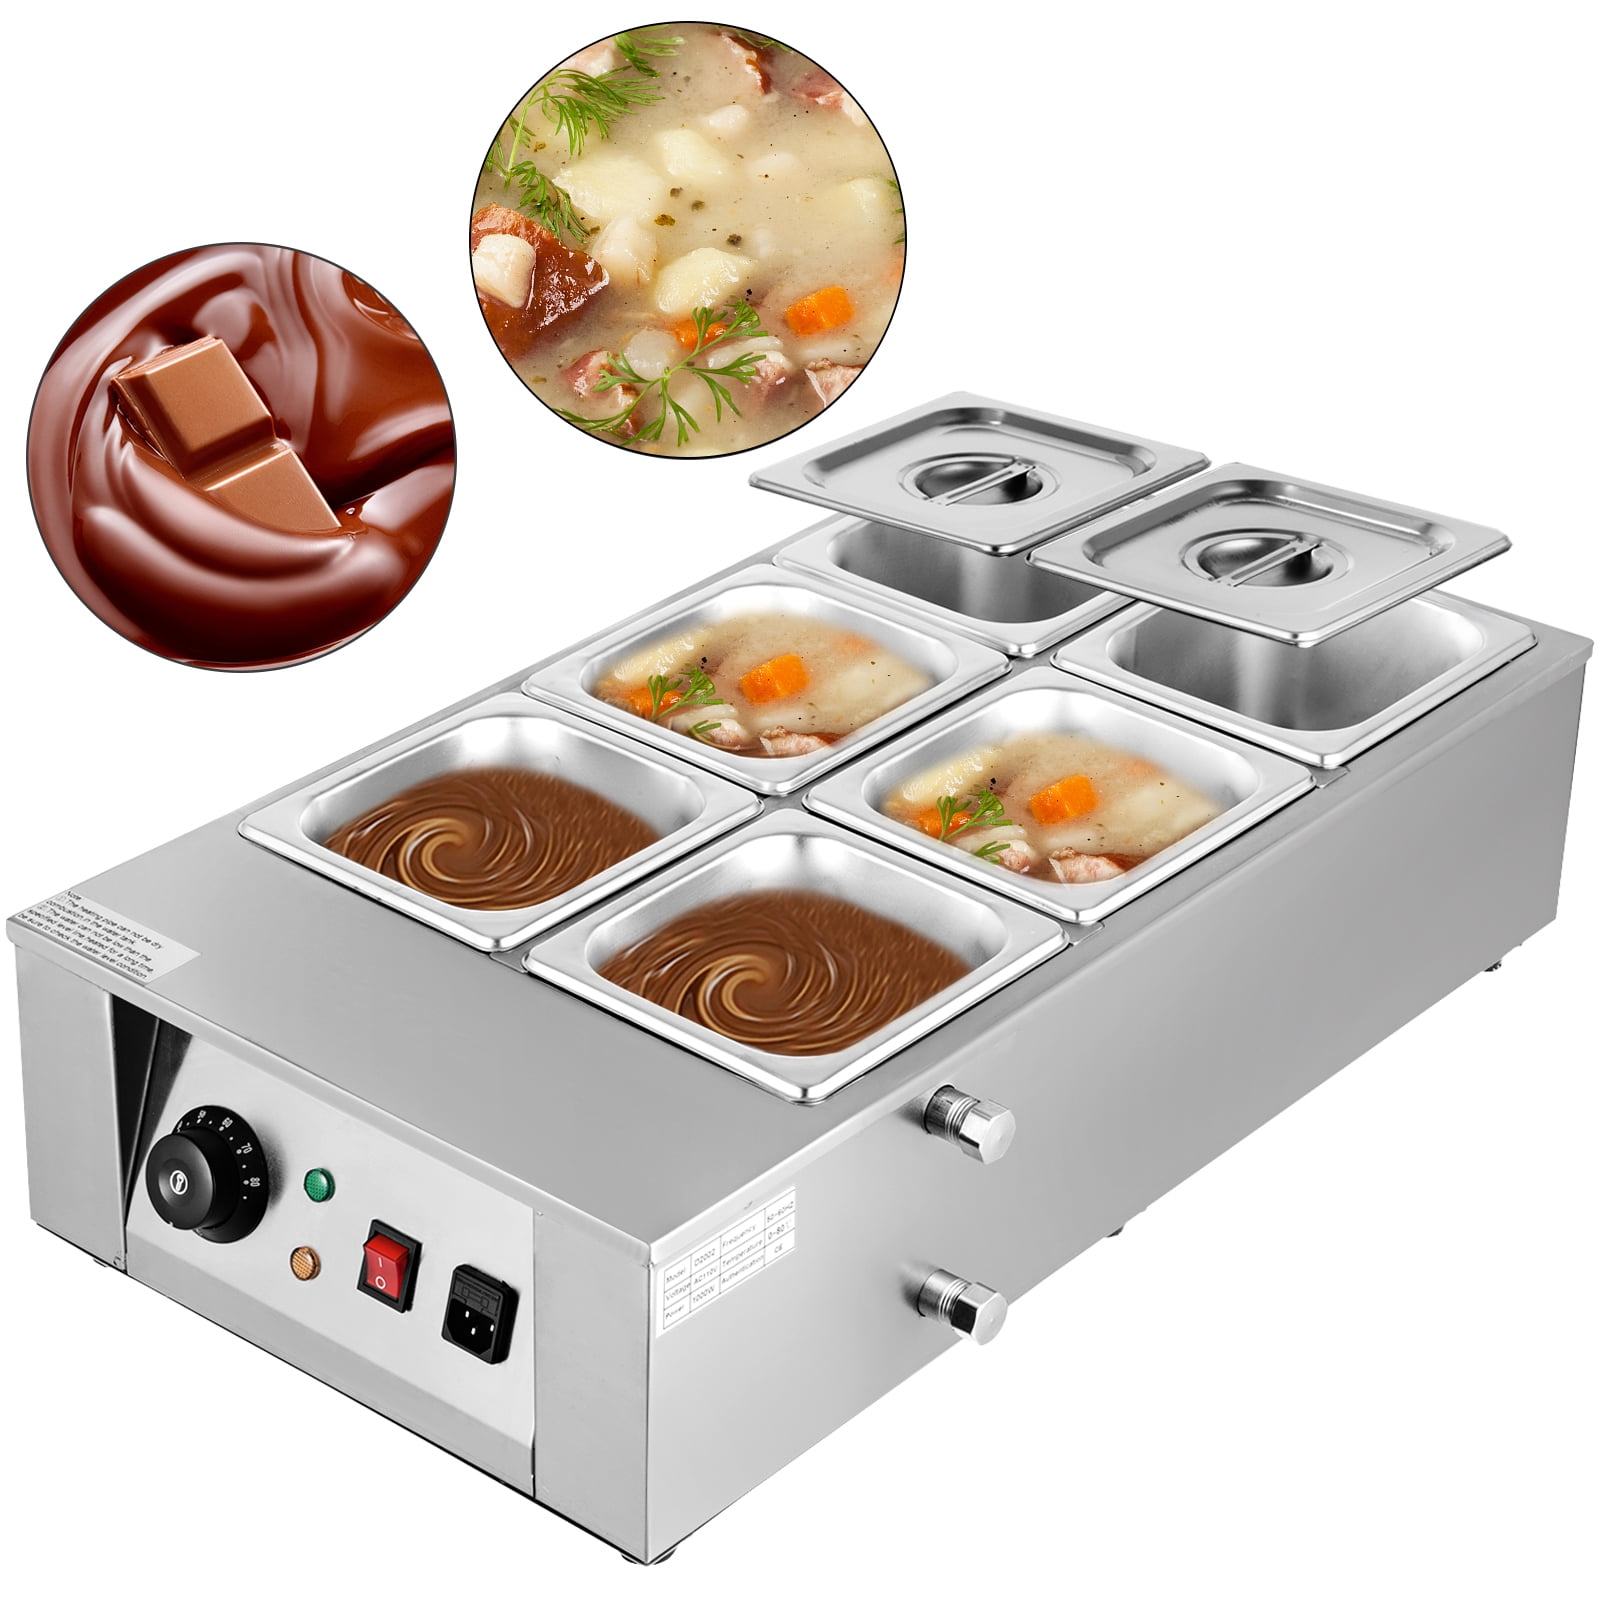 Electric Chocolate Melter Pot Commercial Chocolate Melting Machine Furnace Warme 